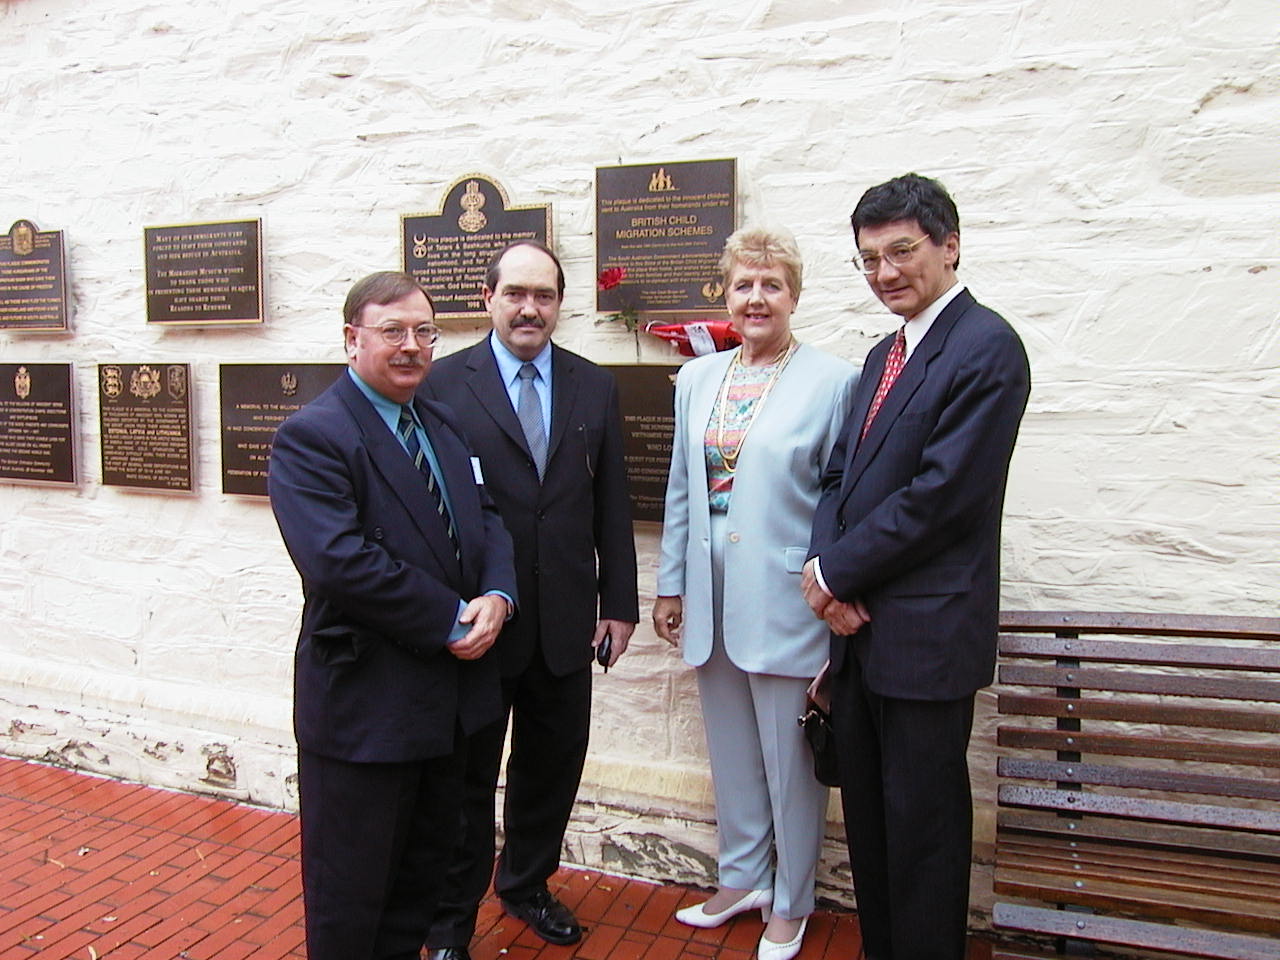 Community Affairs References Committee viewing a plaque commemorating British child migrants at the South Australian Migration Museum, Adelaide, 16 March 2001. L-R: Elton Humphery [Secretary], Senators Andrew Murray, Rosemary Crowley [Chair] and Tsebin Tchen.